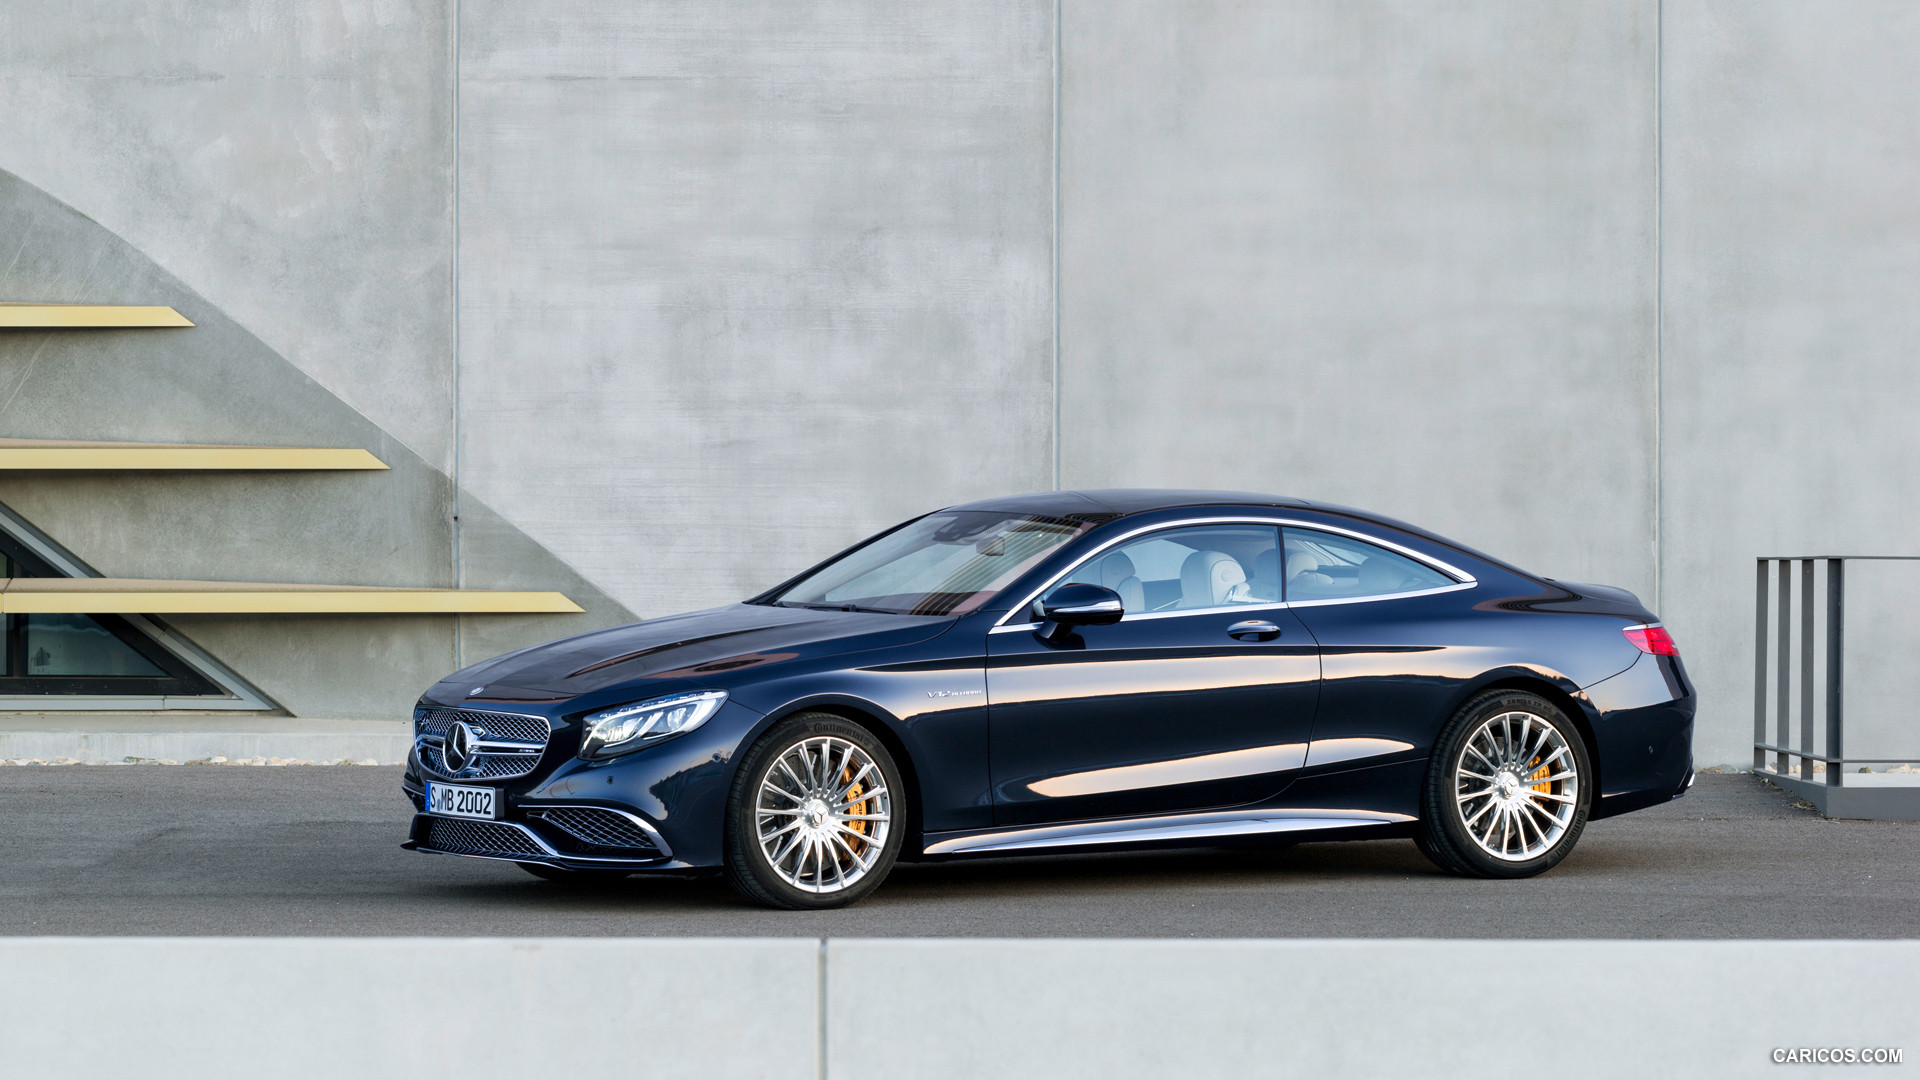 2015 Mercedes-Benz S65 AMG Coupe (Anthracite Blue) - Side, #10 of 101